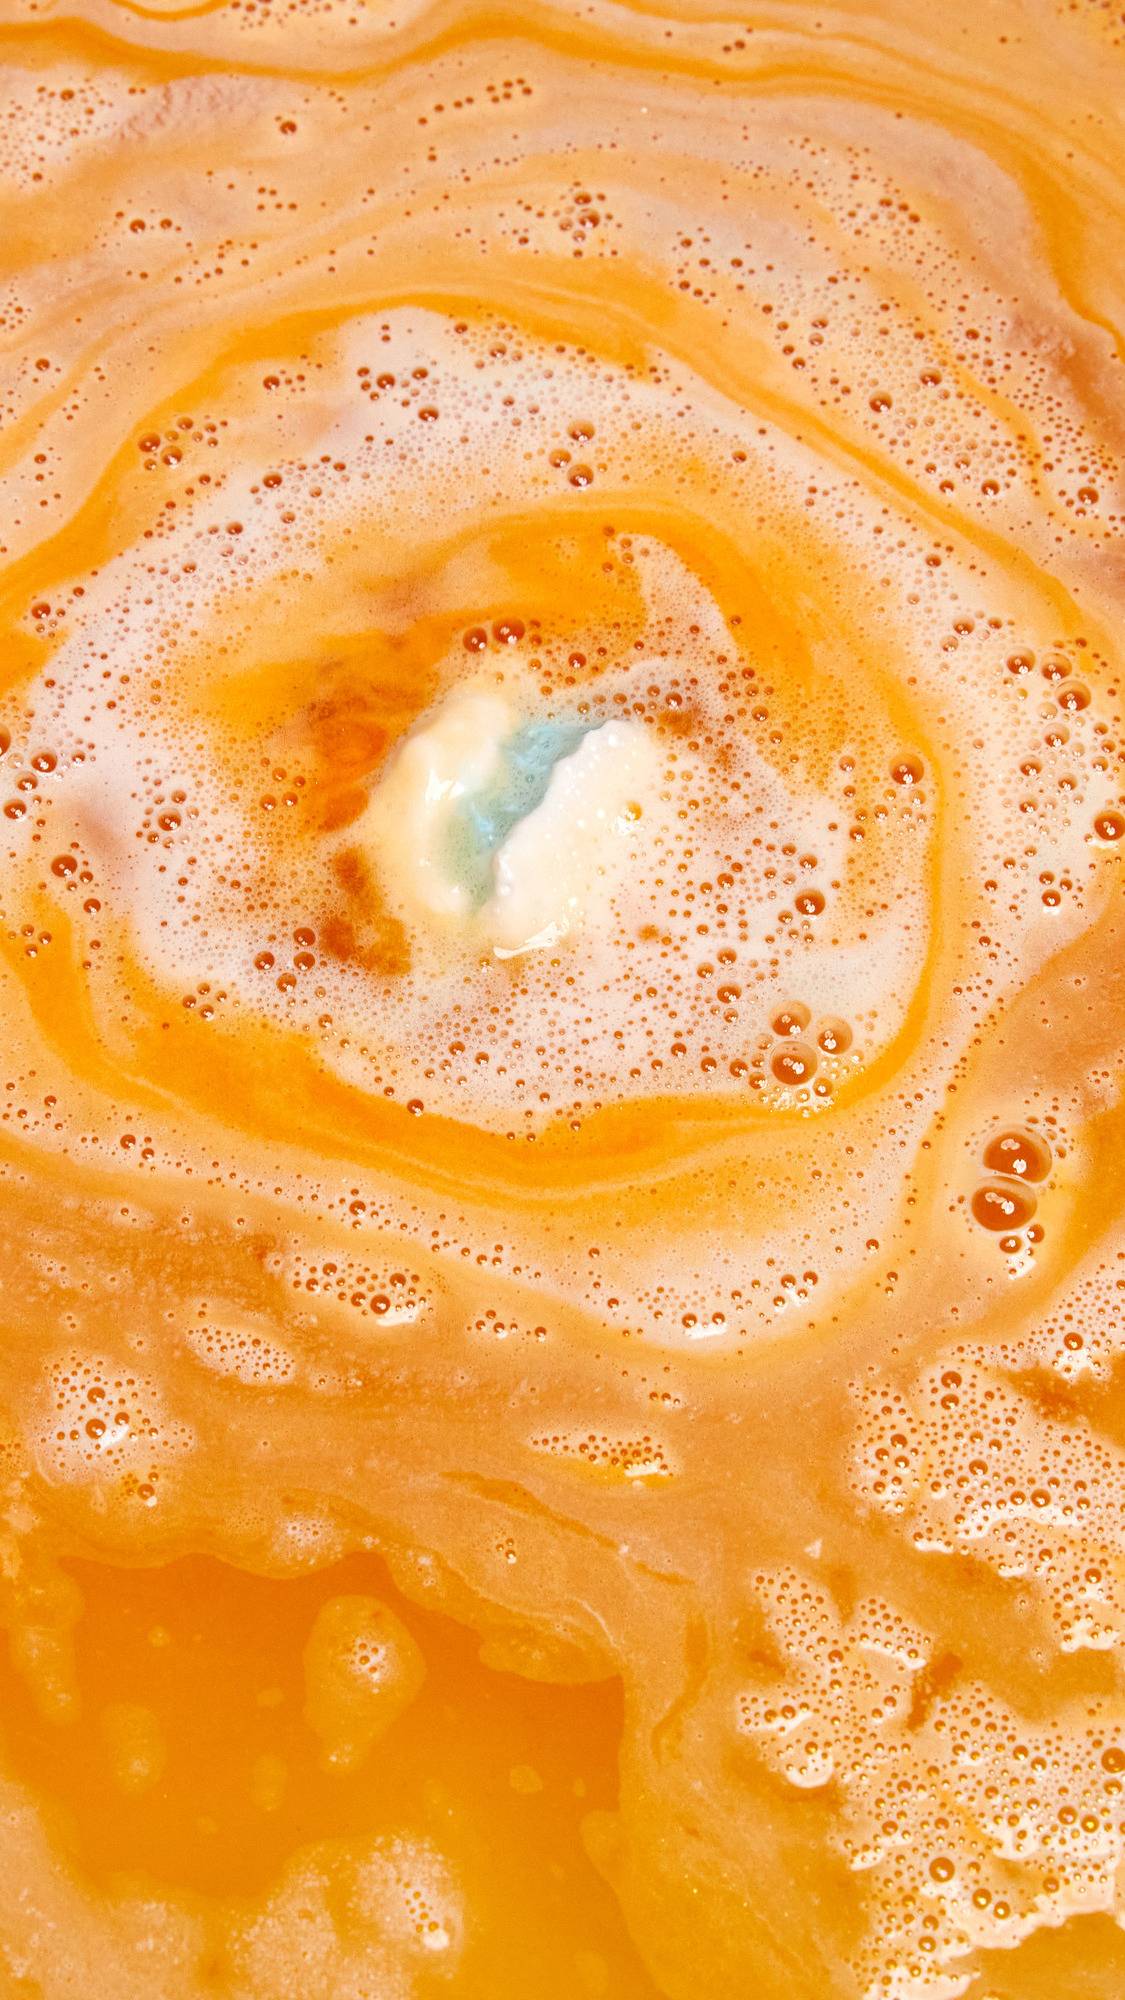 The Chelsea Morning bath bomb is dissolving in the bath water creating alternating layers of foamy, white and bright orange ripples.